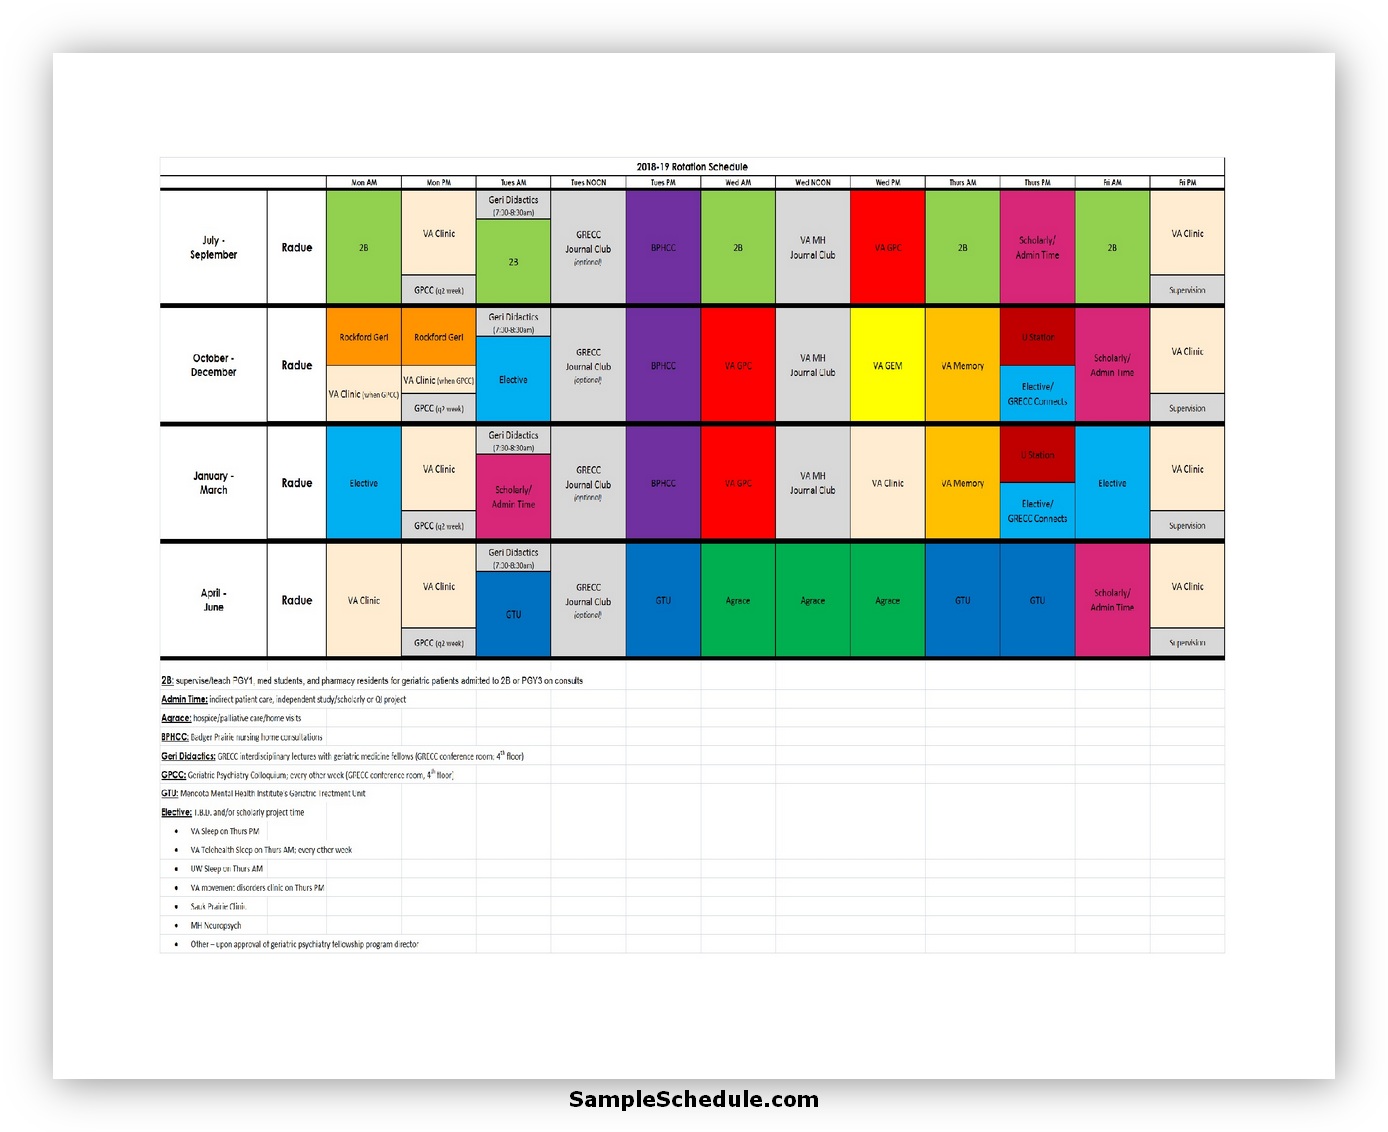 51-free-rotation-schedule-template-sample-schedule